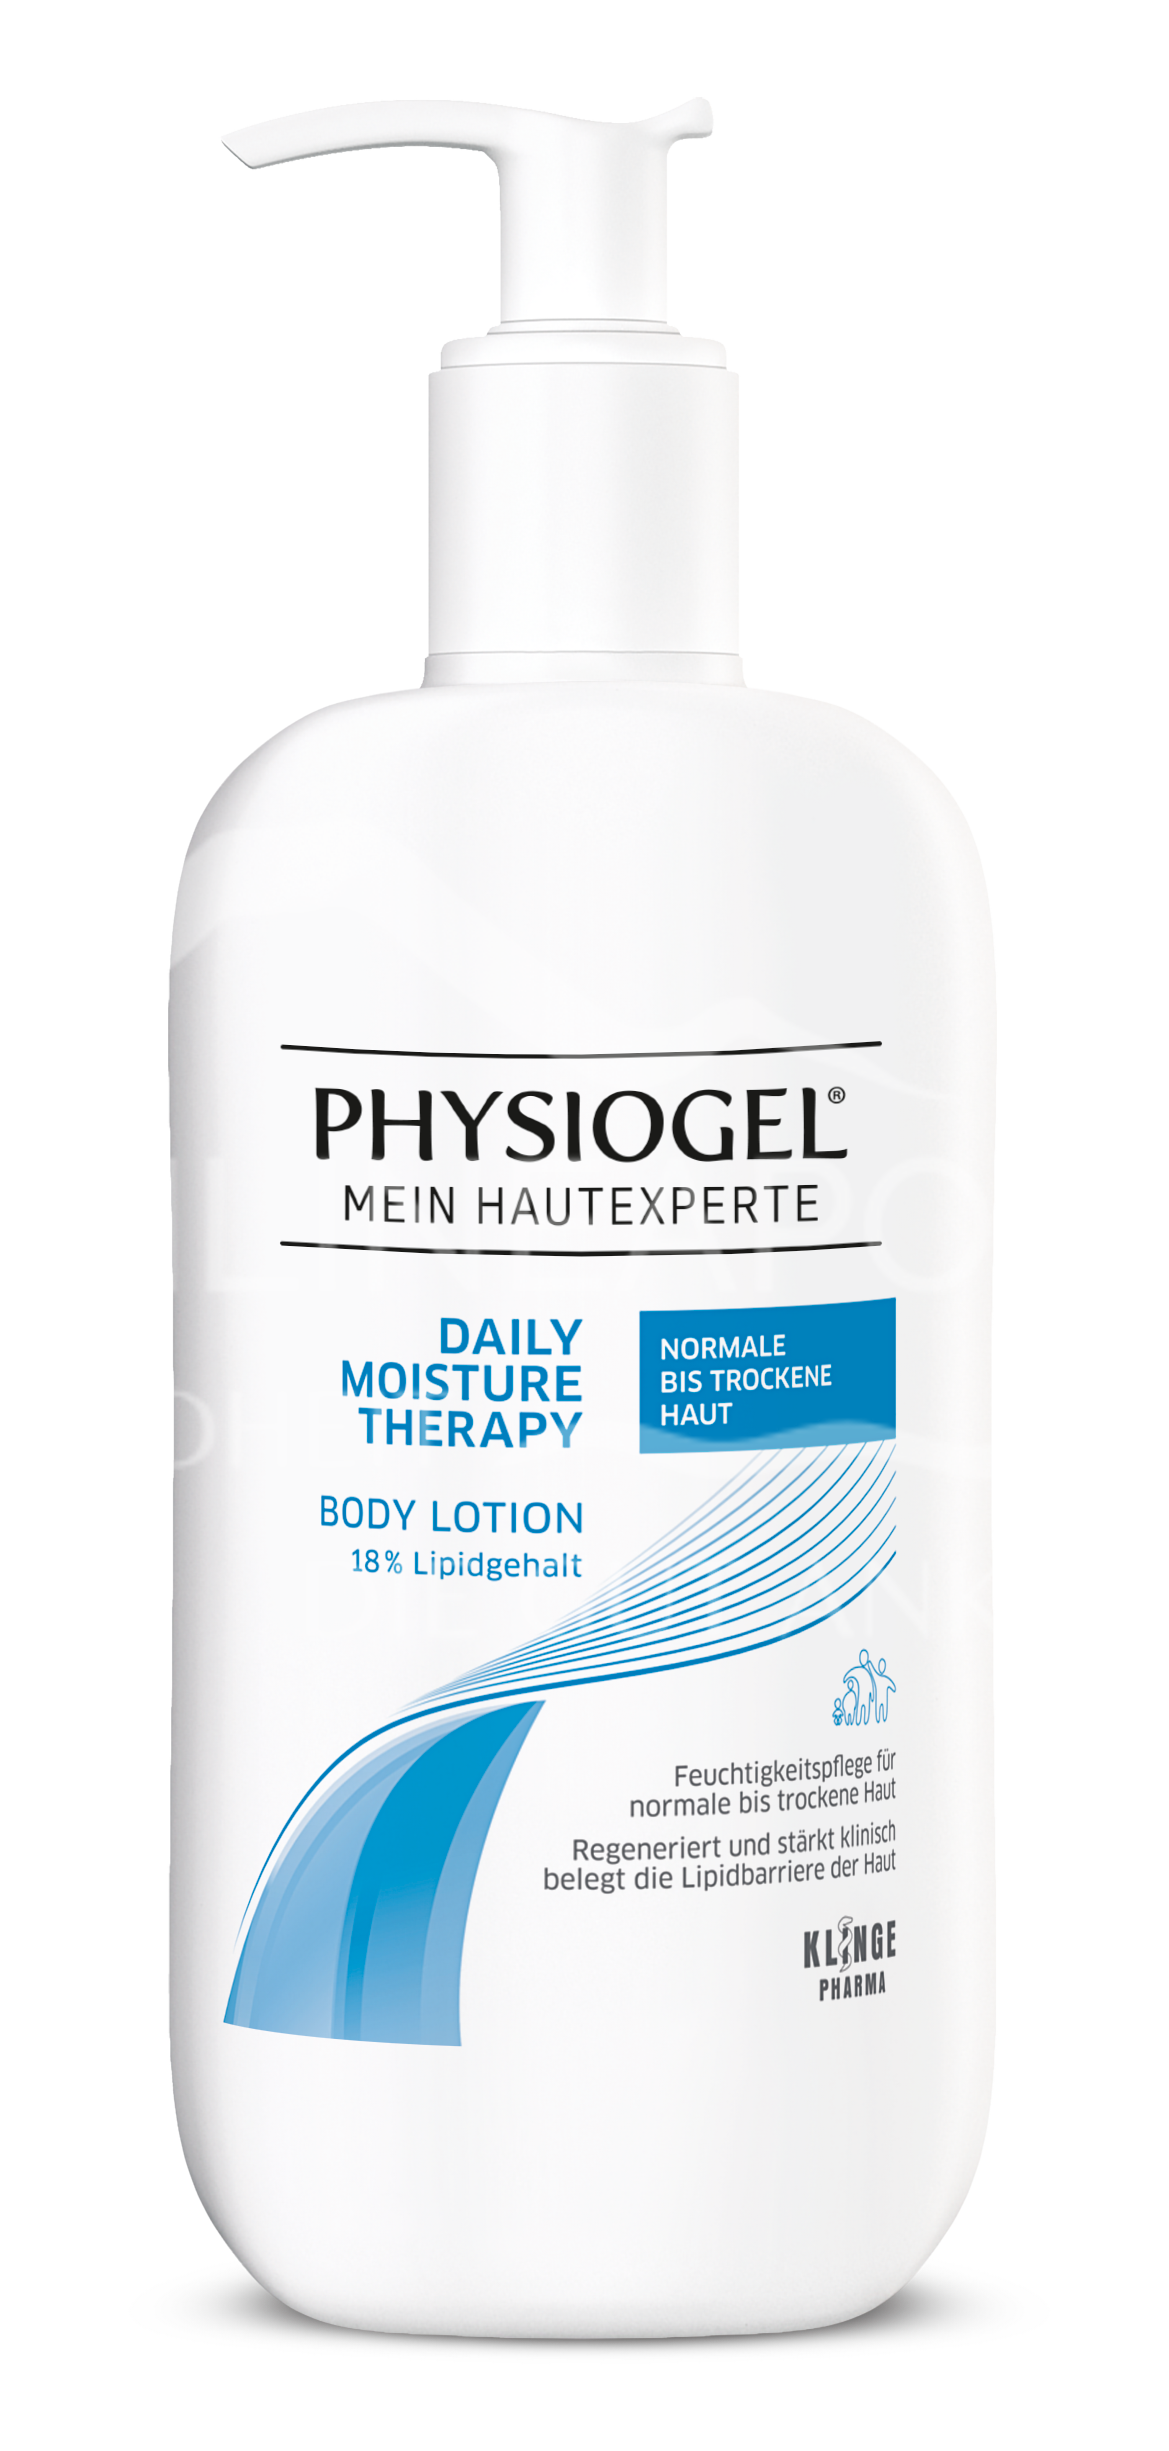 Physiogel® Daily Moisture Therapy Body Lotion - Normale bis trockene Haut